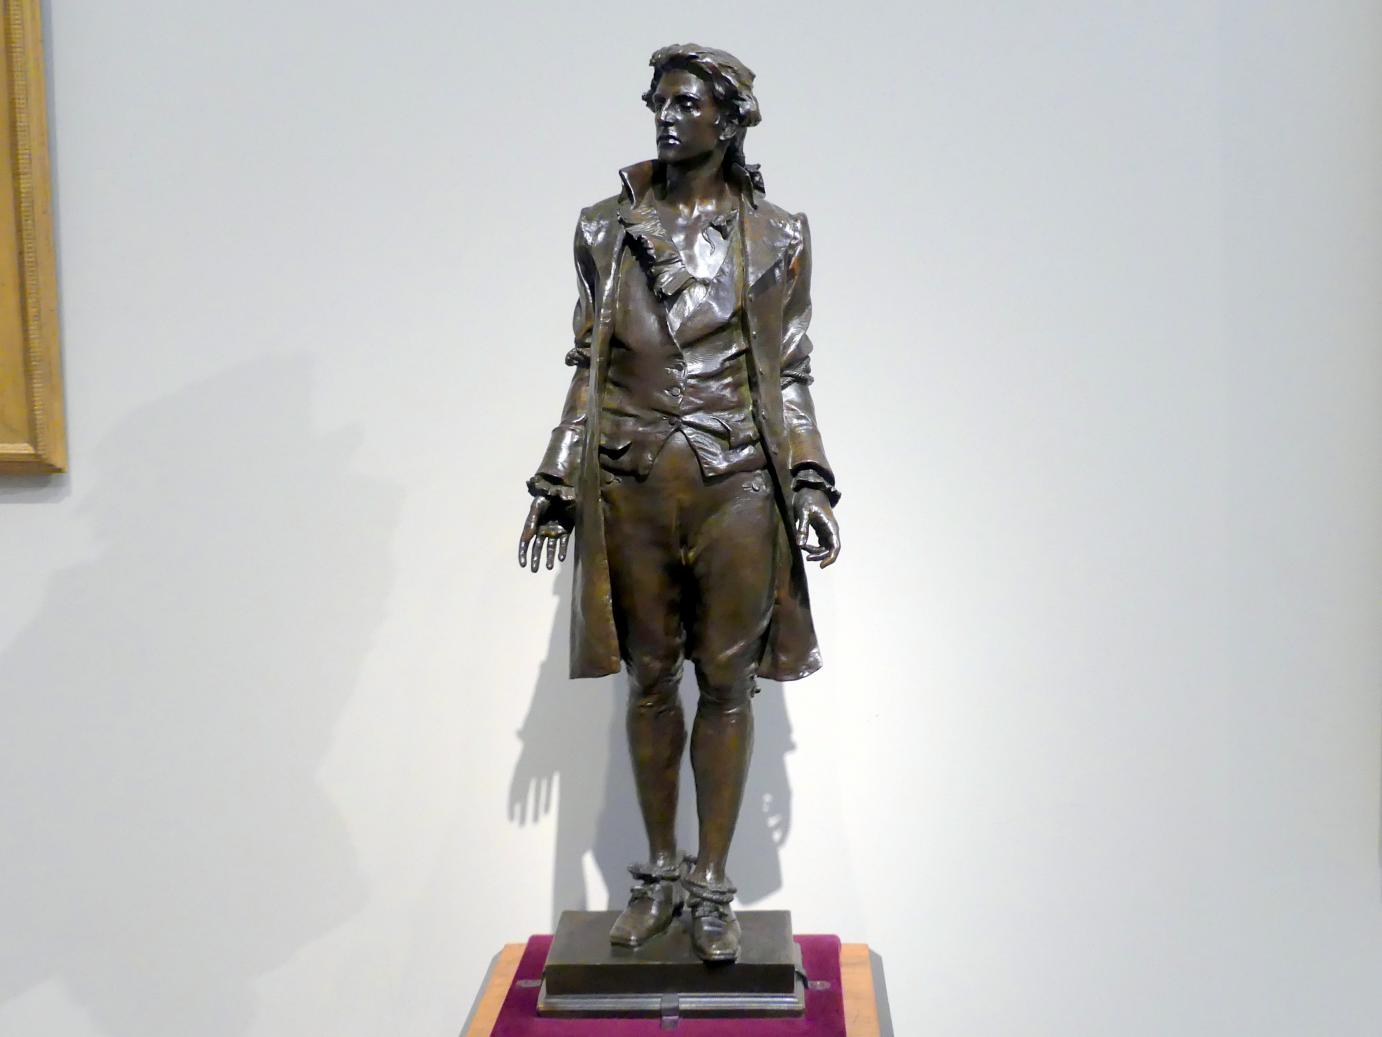 Frederick William MacMonnies: Nathan Hale, 1890